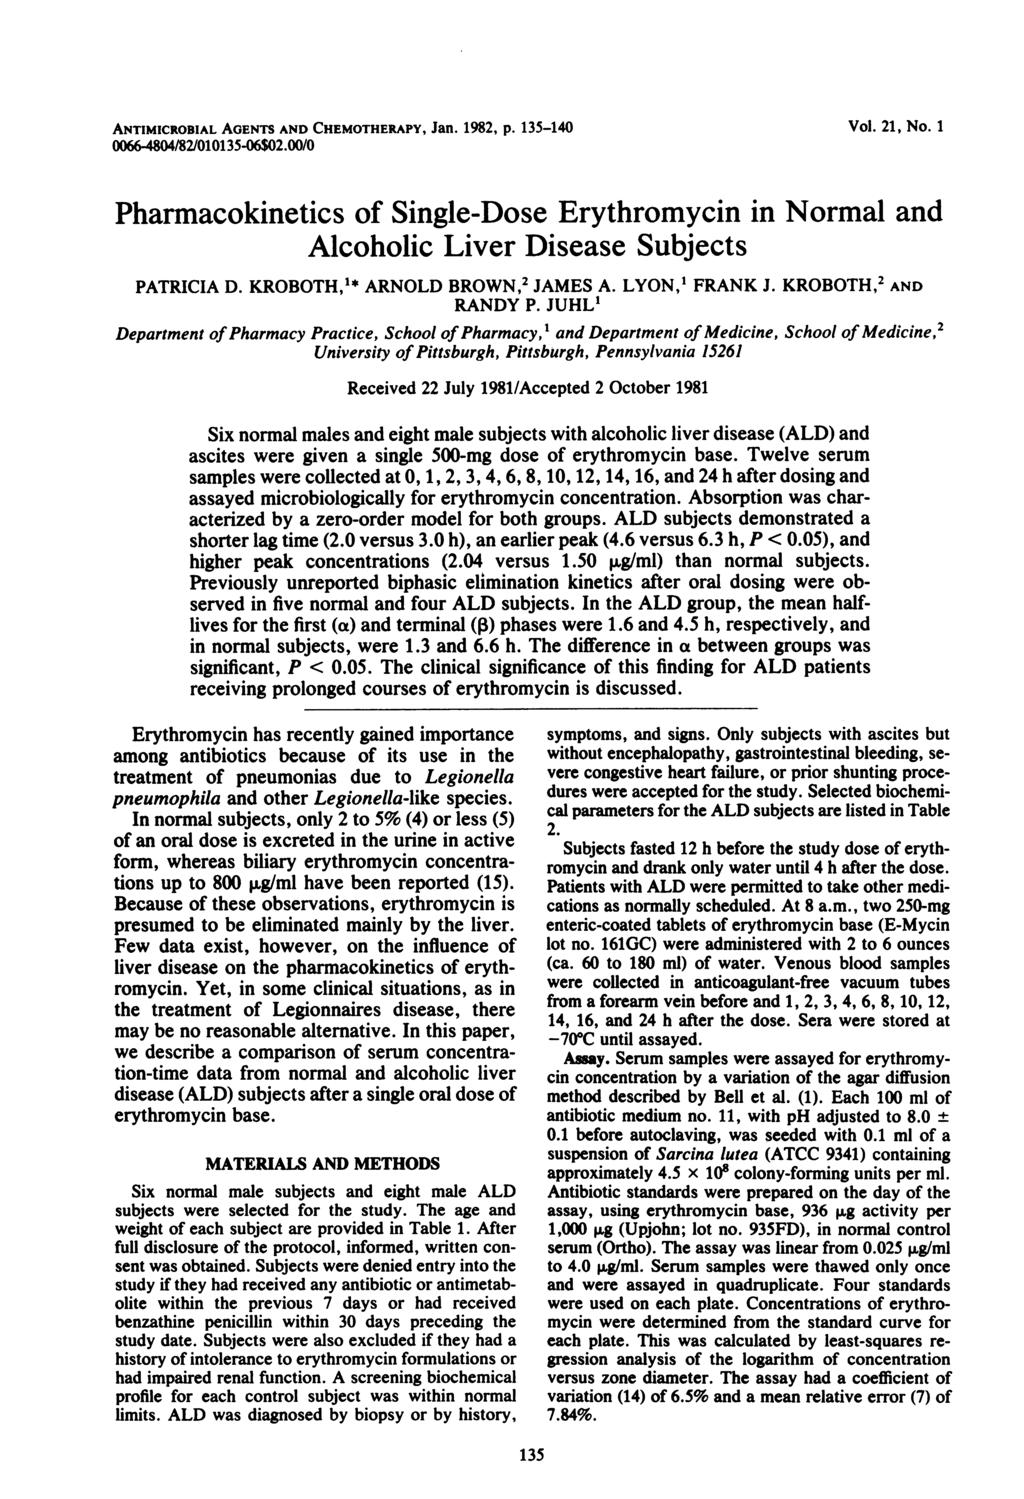 ANTIMICROBIAL AGENTS AND CHEMOTHERAPY, Jan. 1982, p. 135-140 Vol. 21, No. 1 0066-4804/82/010135-06$02.